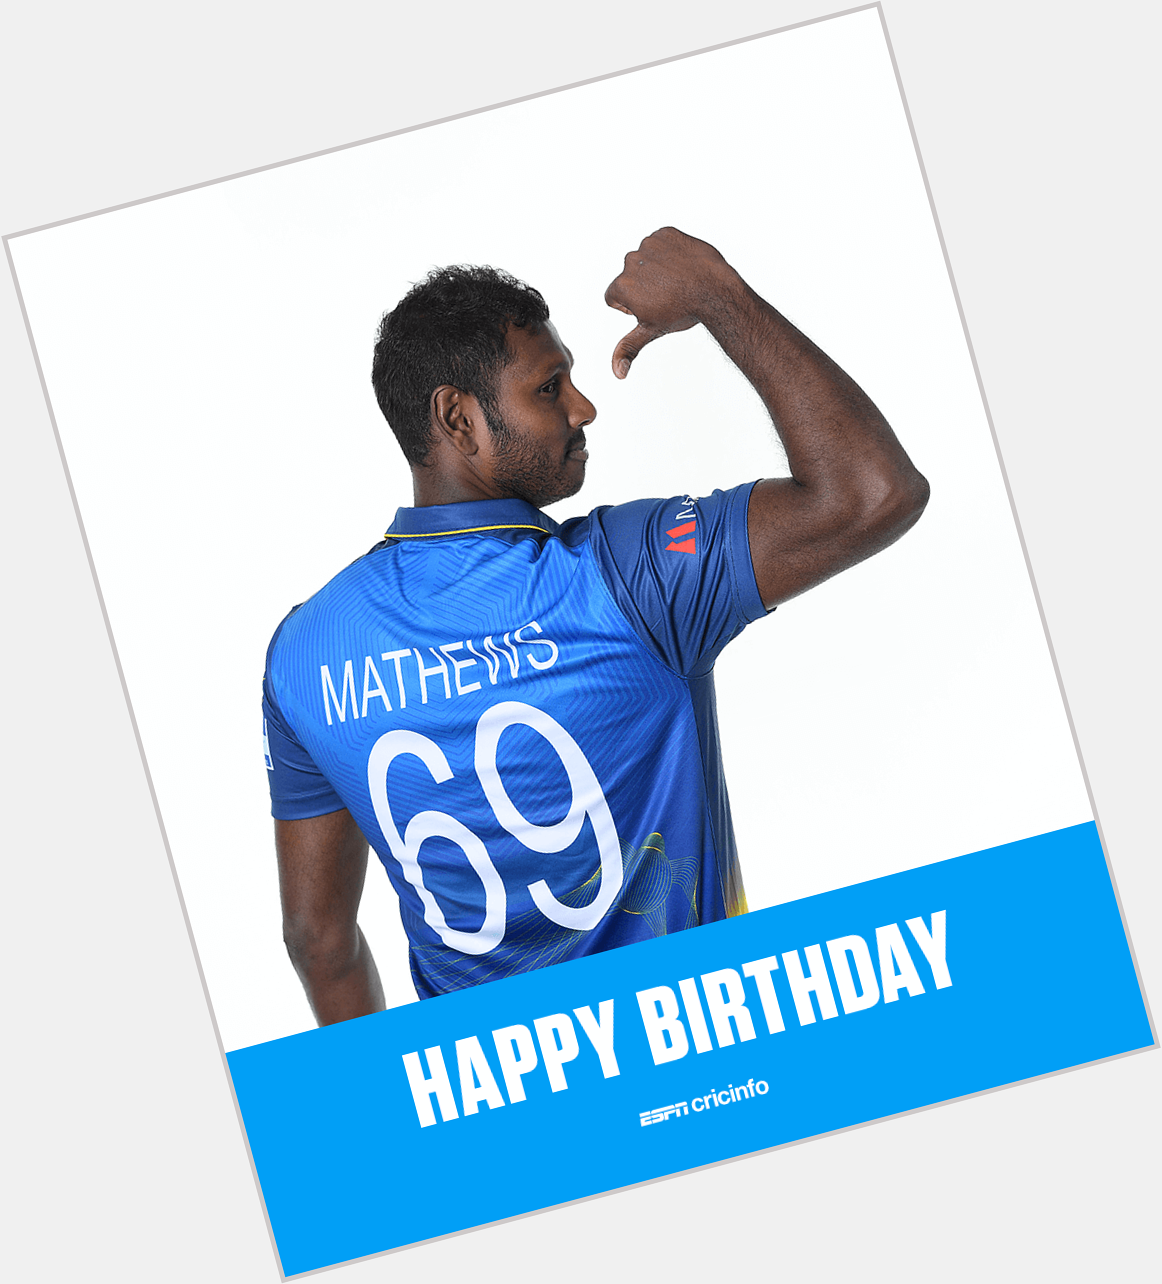  Happy birthday to Angelo Mathews! Will he make a big impact at this World Cup? 